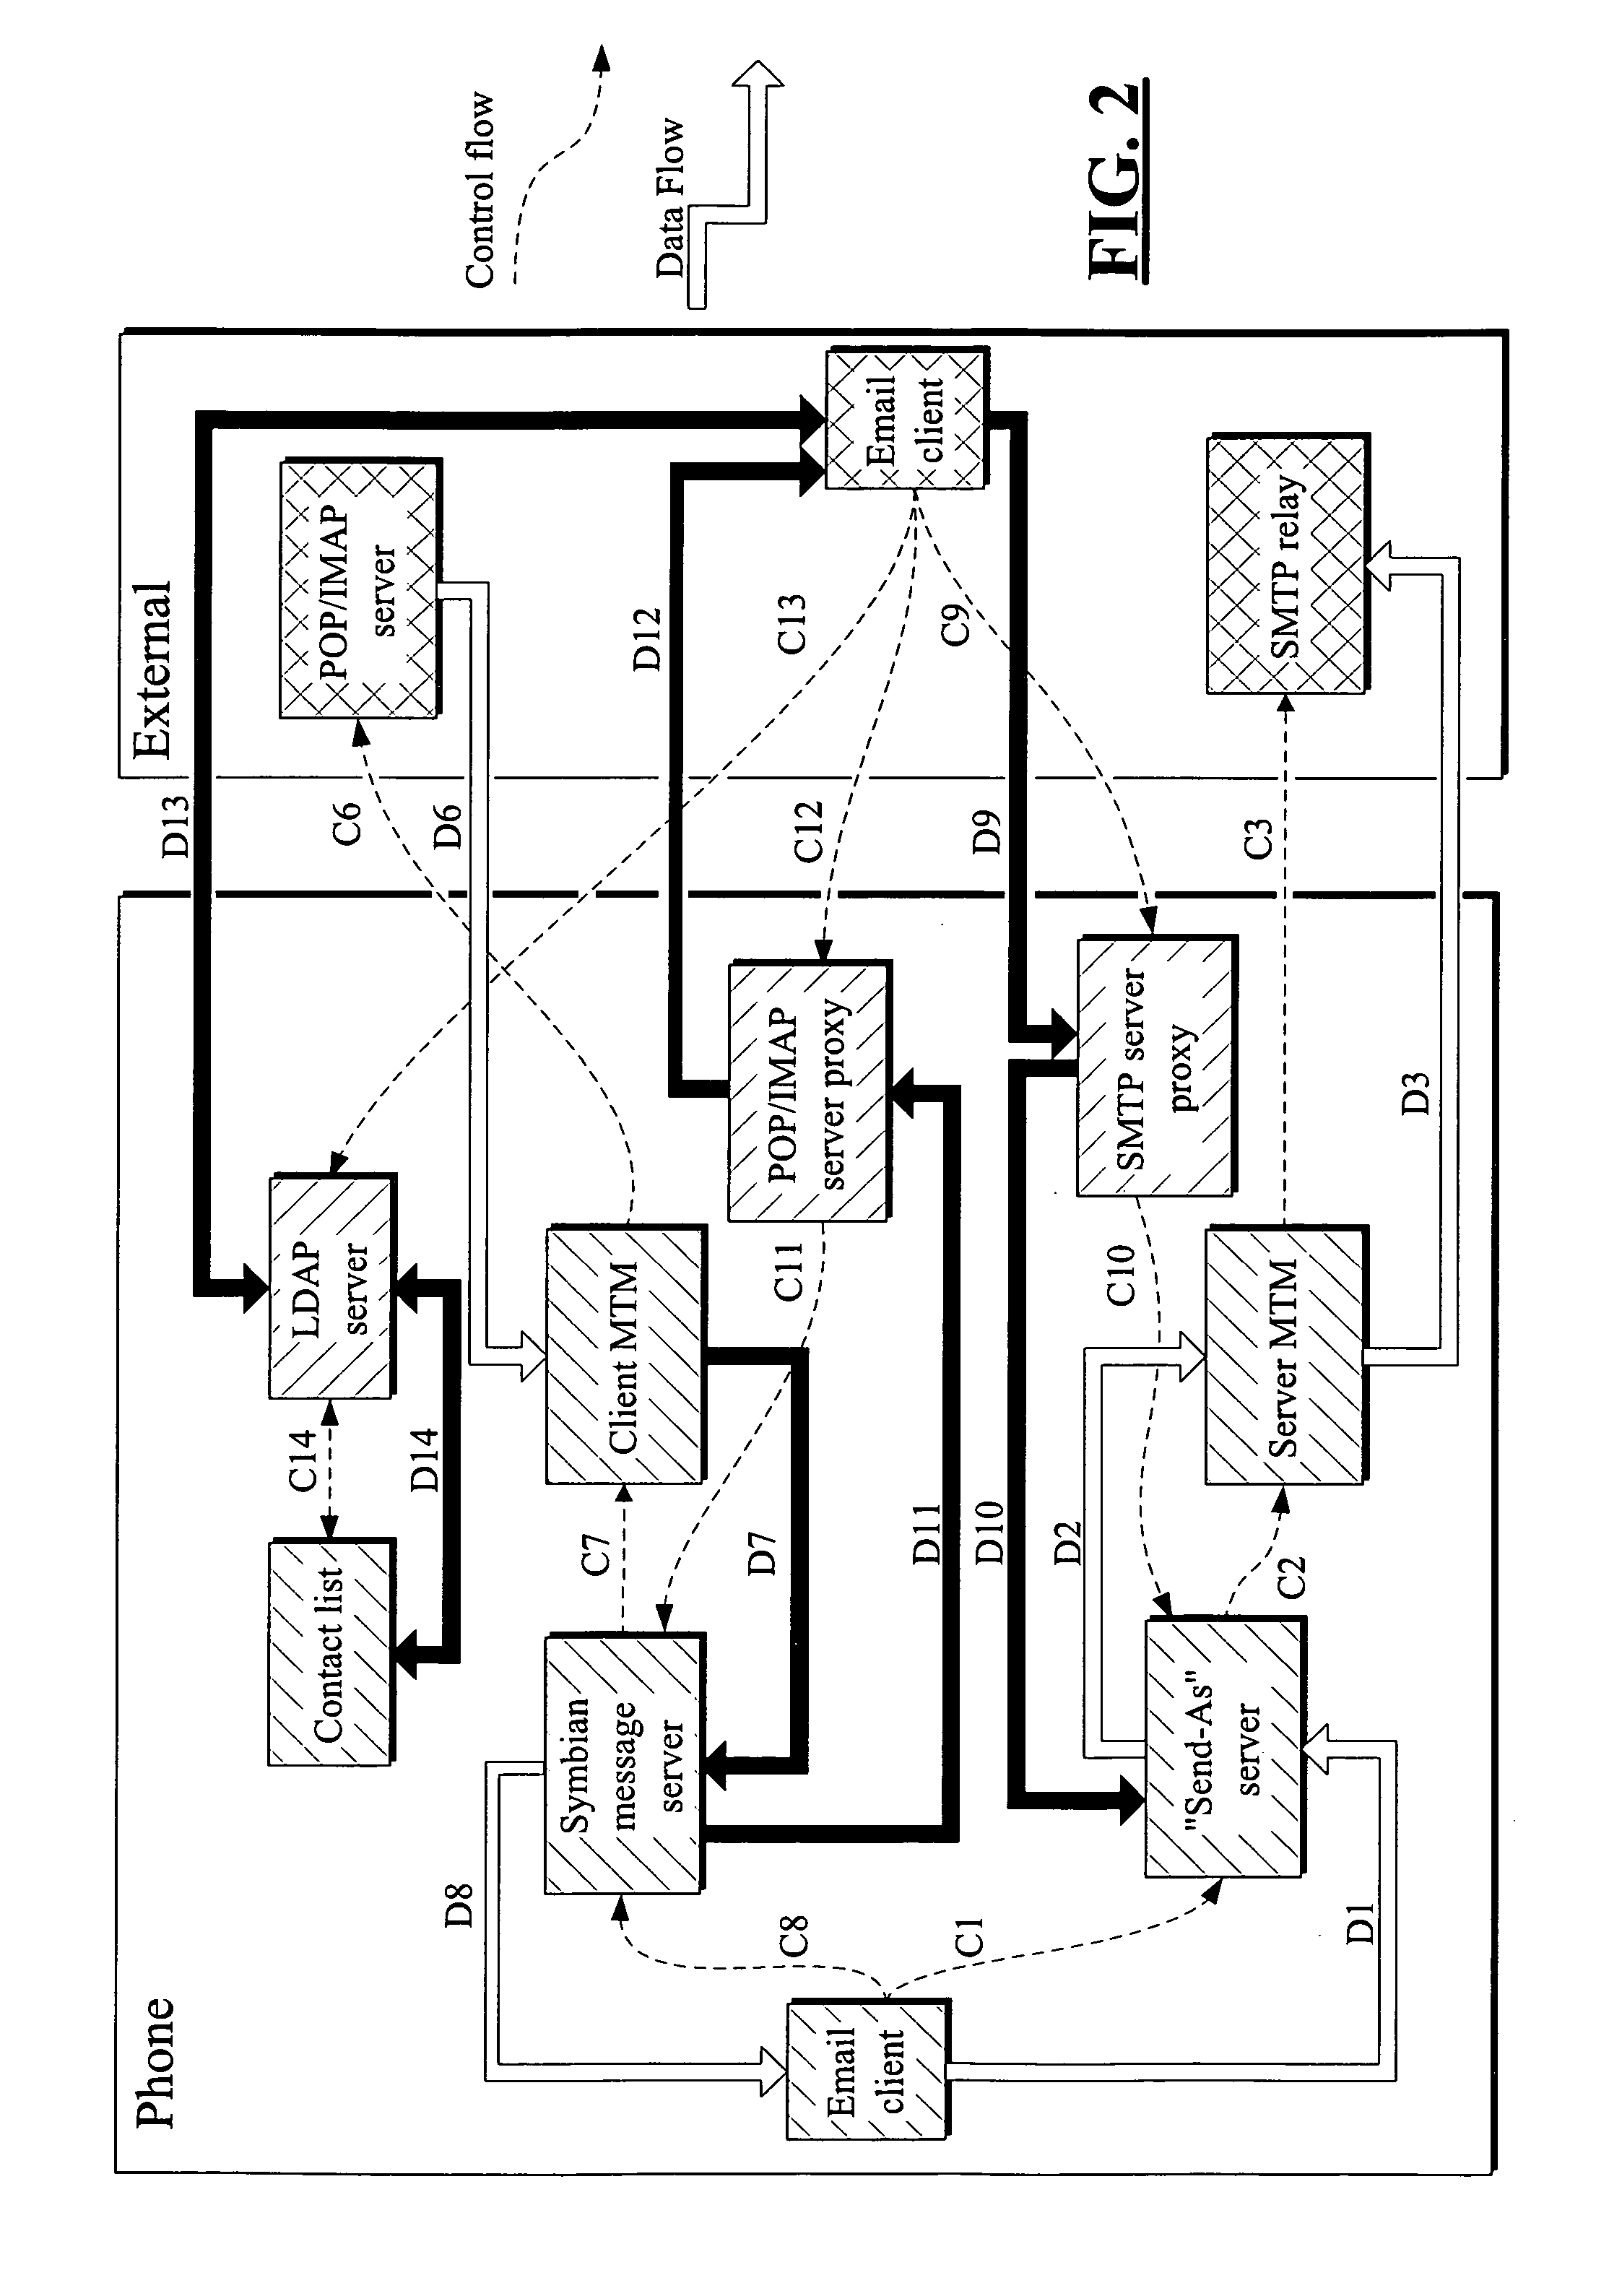 System, methods, software, and devices employing messaging